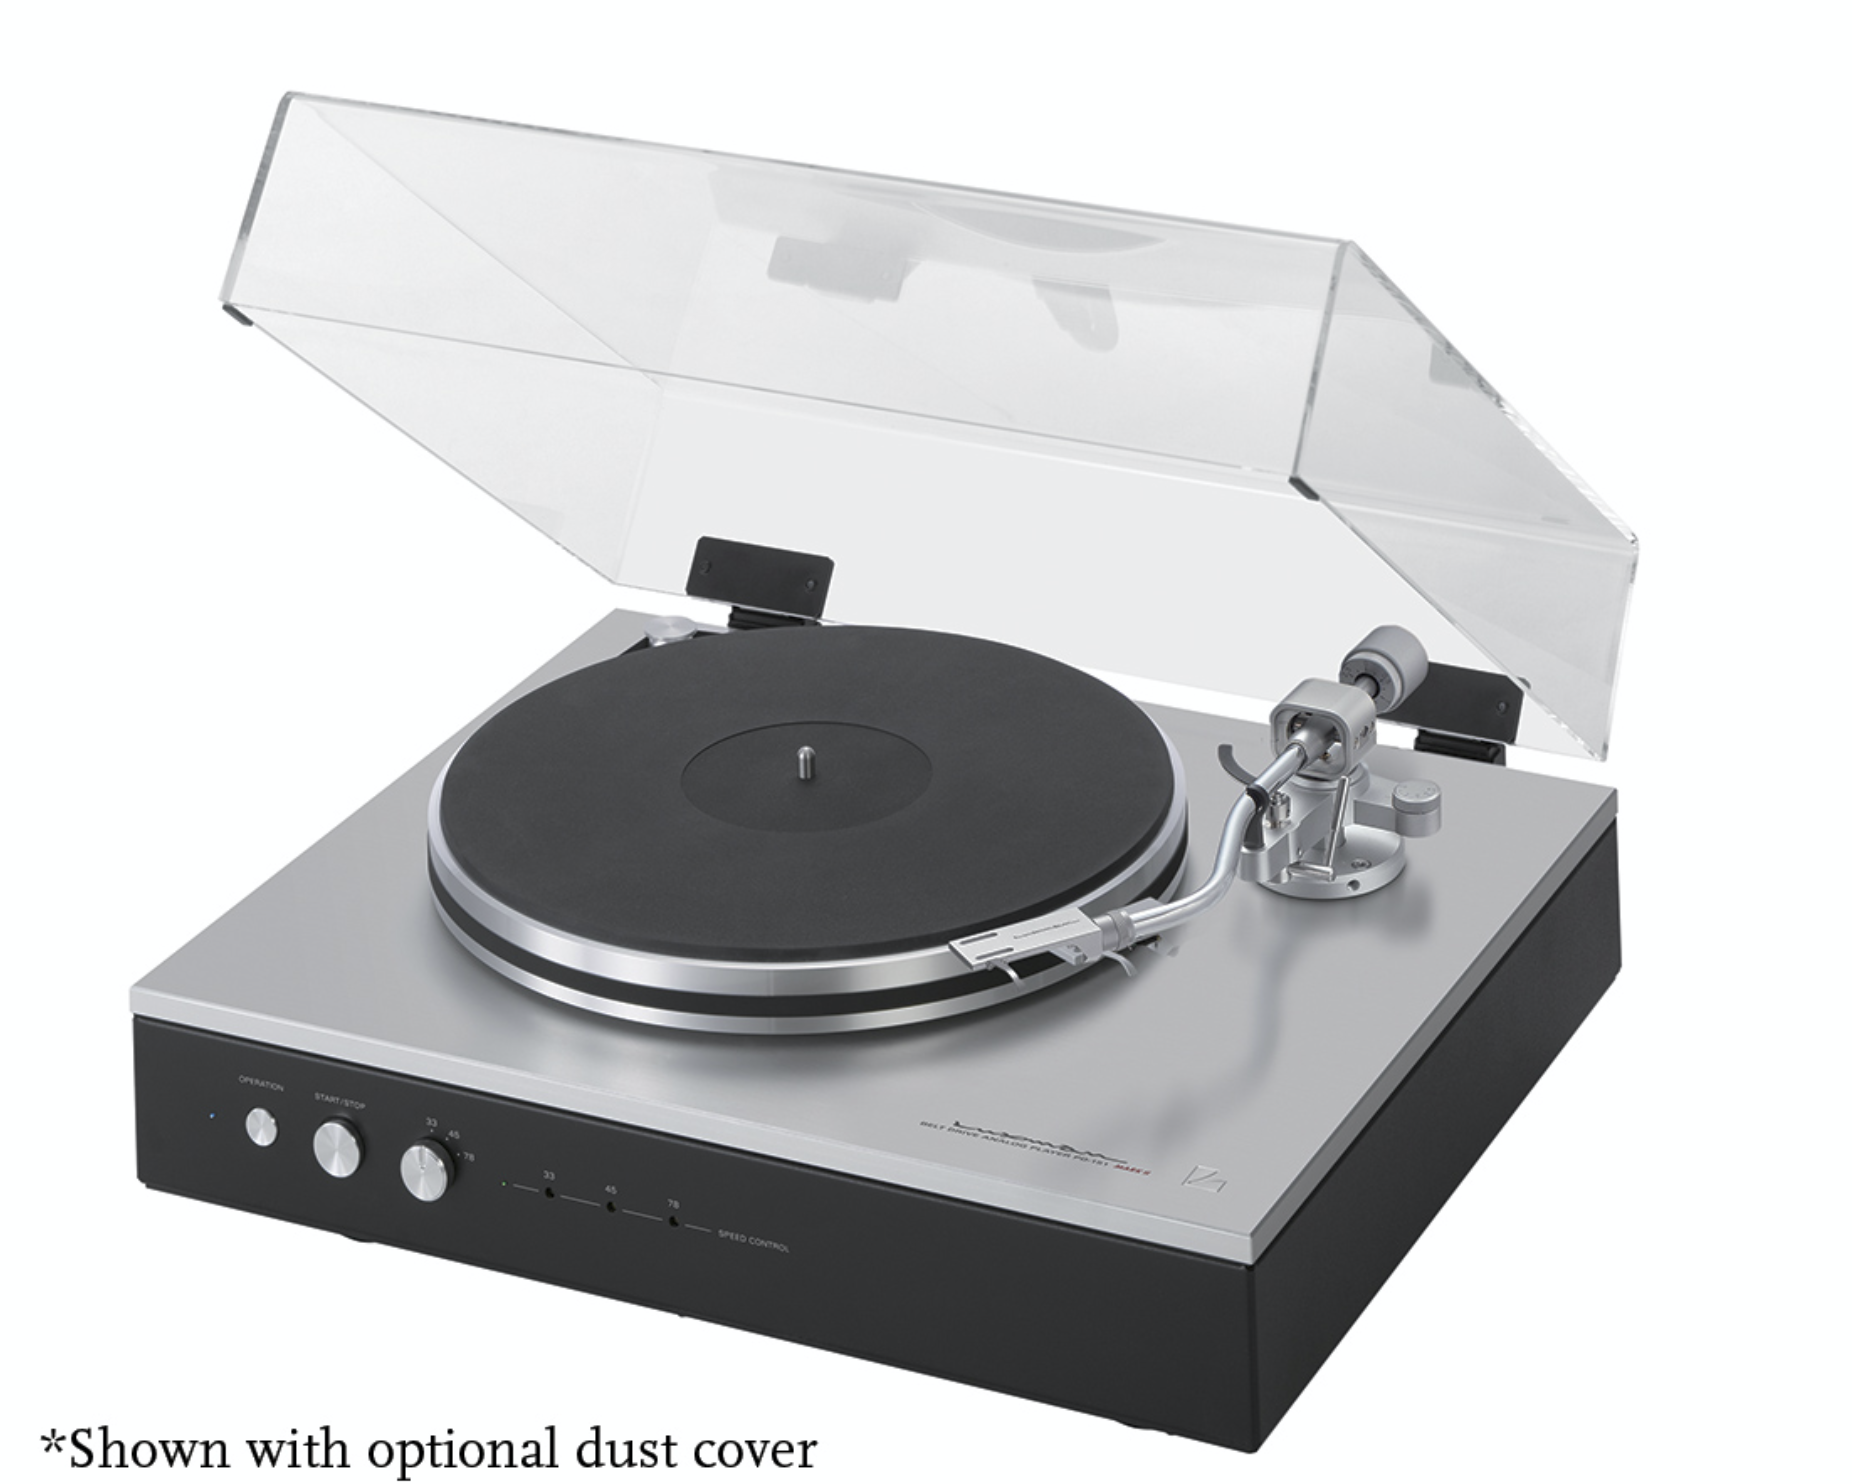 PD-151 MKII Turntable from Basil Audio